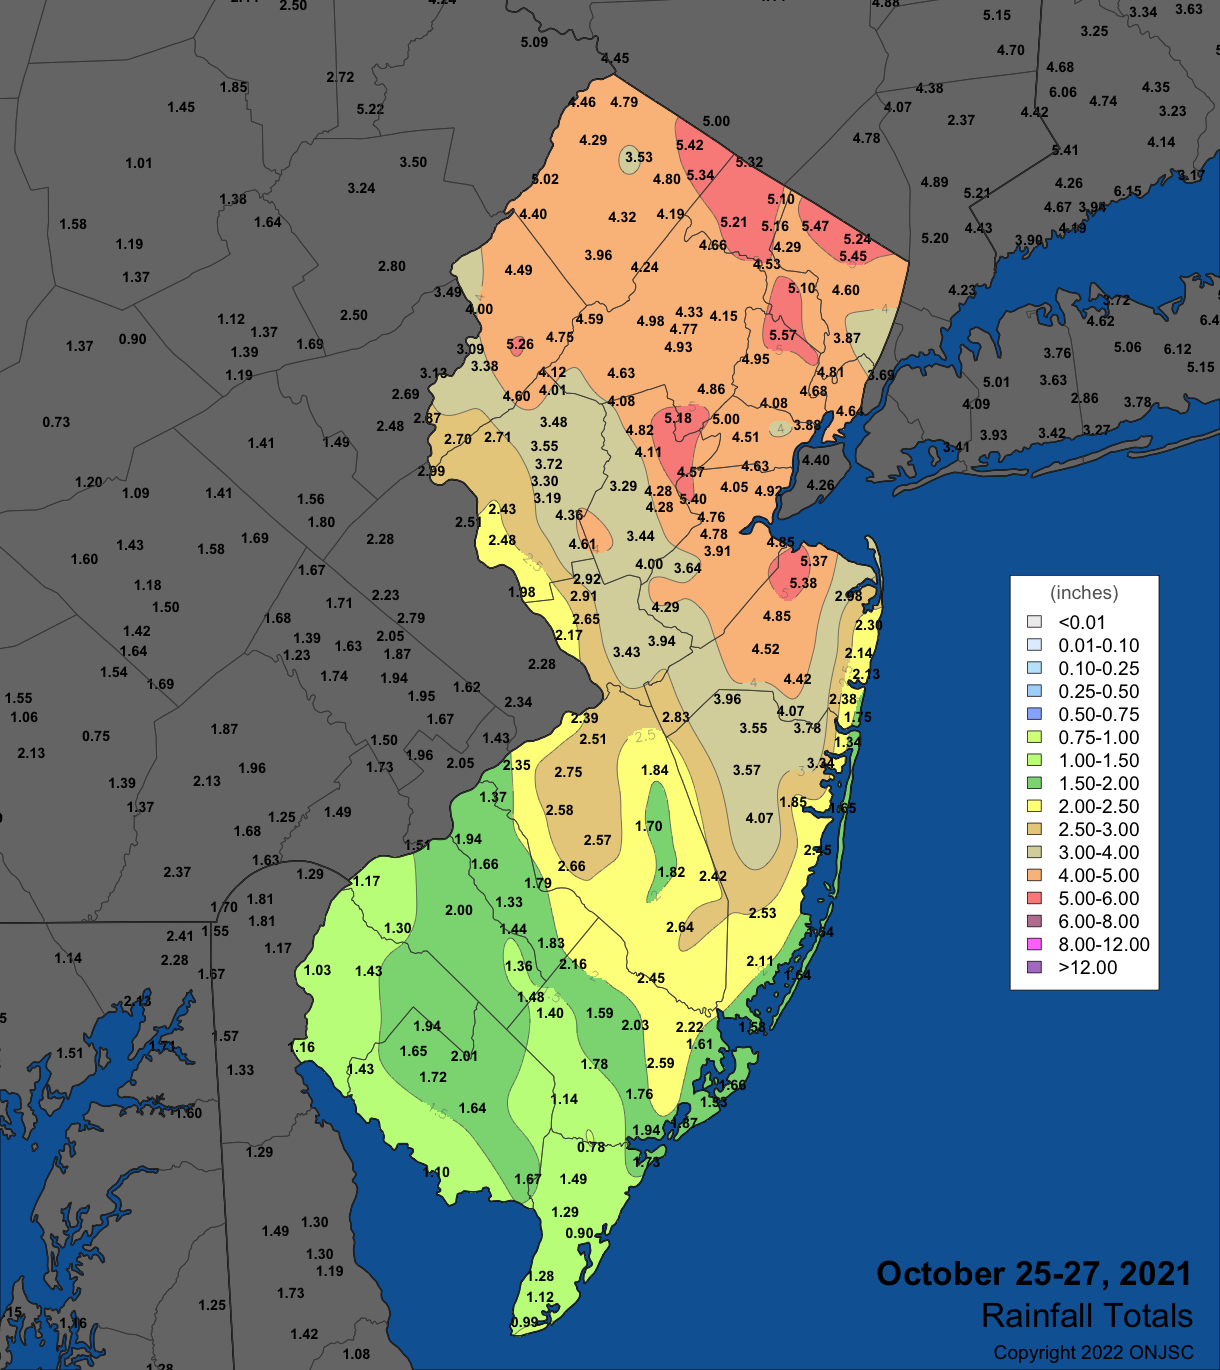 October 25th–27th rainfall in NJ and surrounding states based on observations from Rutgers NJ Weather Network, NJ CoCoRaHS, National Weather Service Cooperative stations, and observations from several other networks. Over 350 NJ observations were used to generate the map.